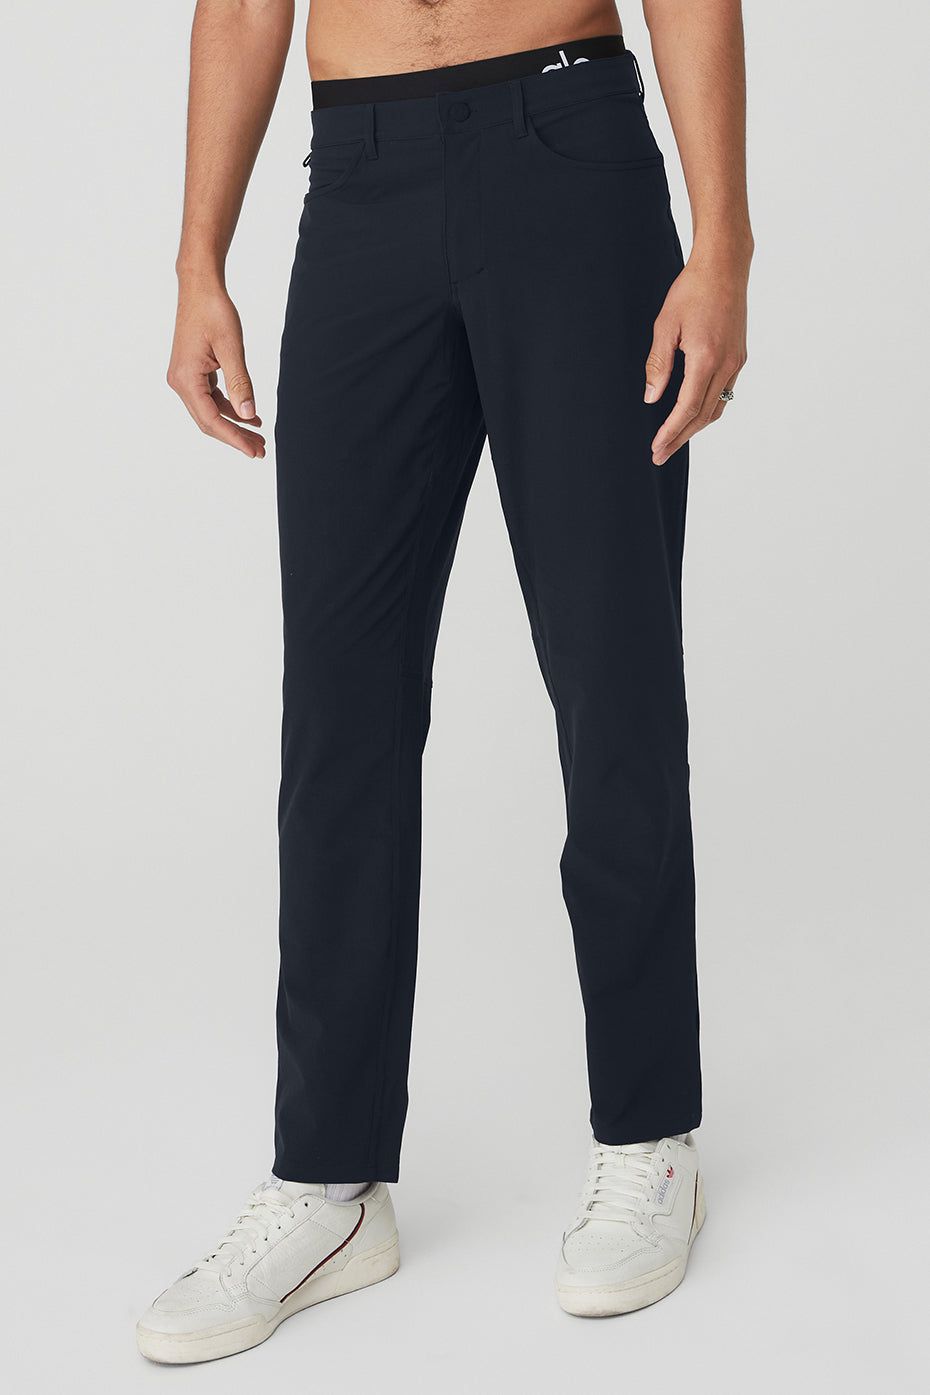 Men's sports pants in navy blue from Gym Generation – Gym Generation®